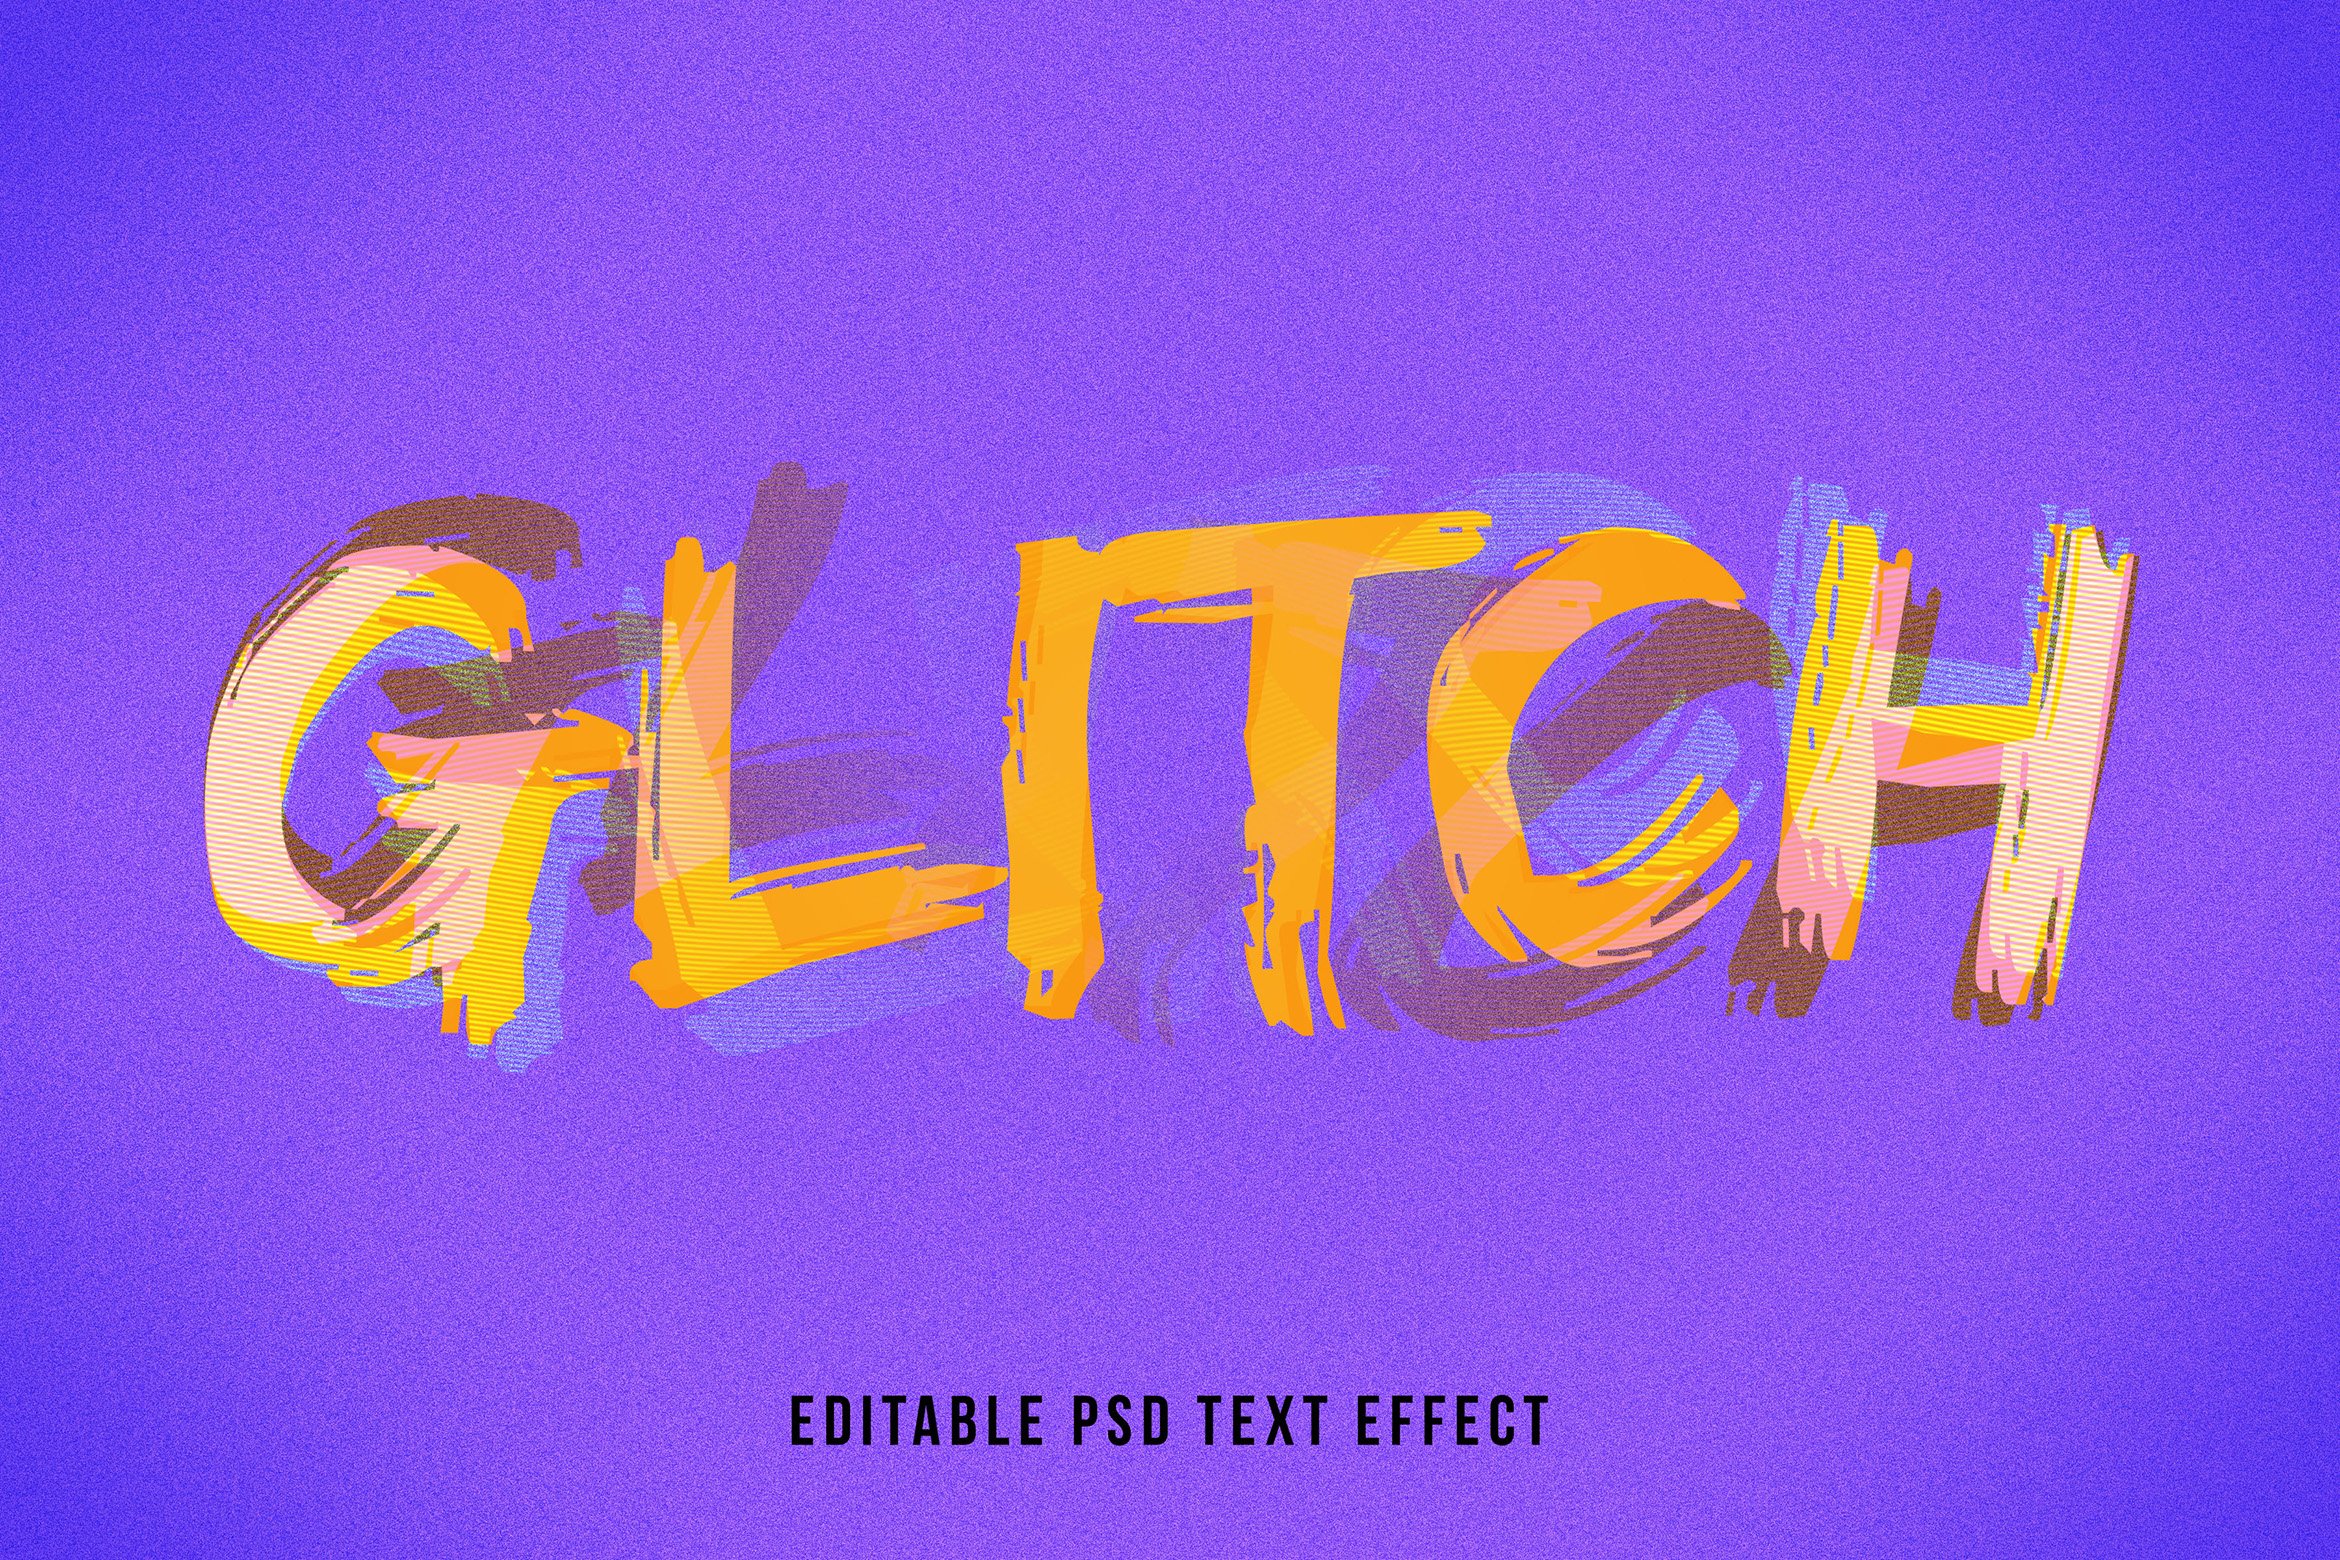 Text Effect Glitchcover image.